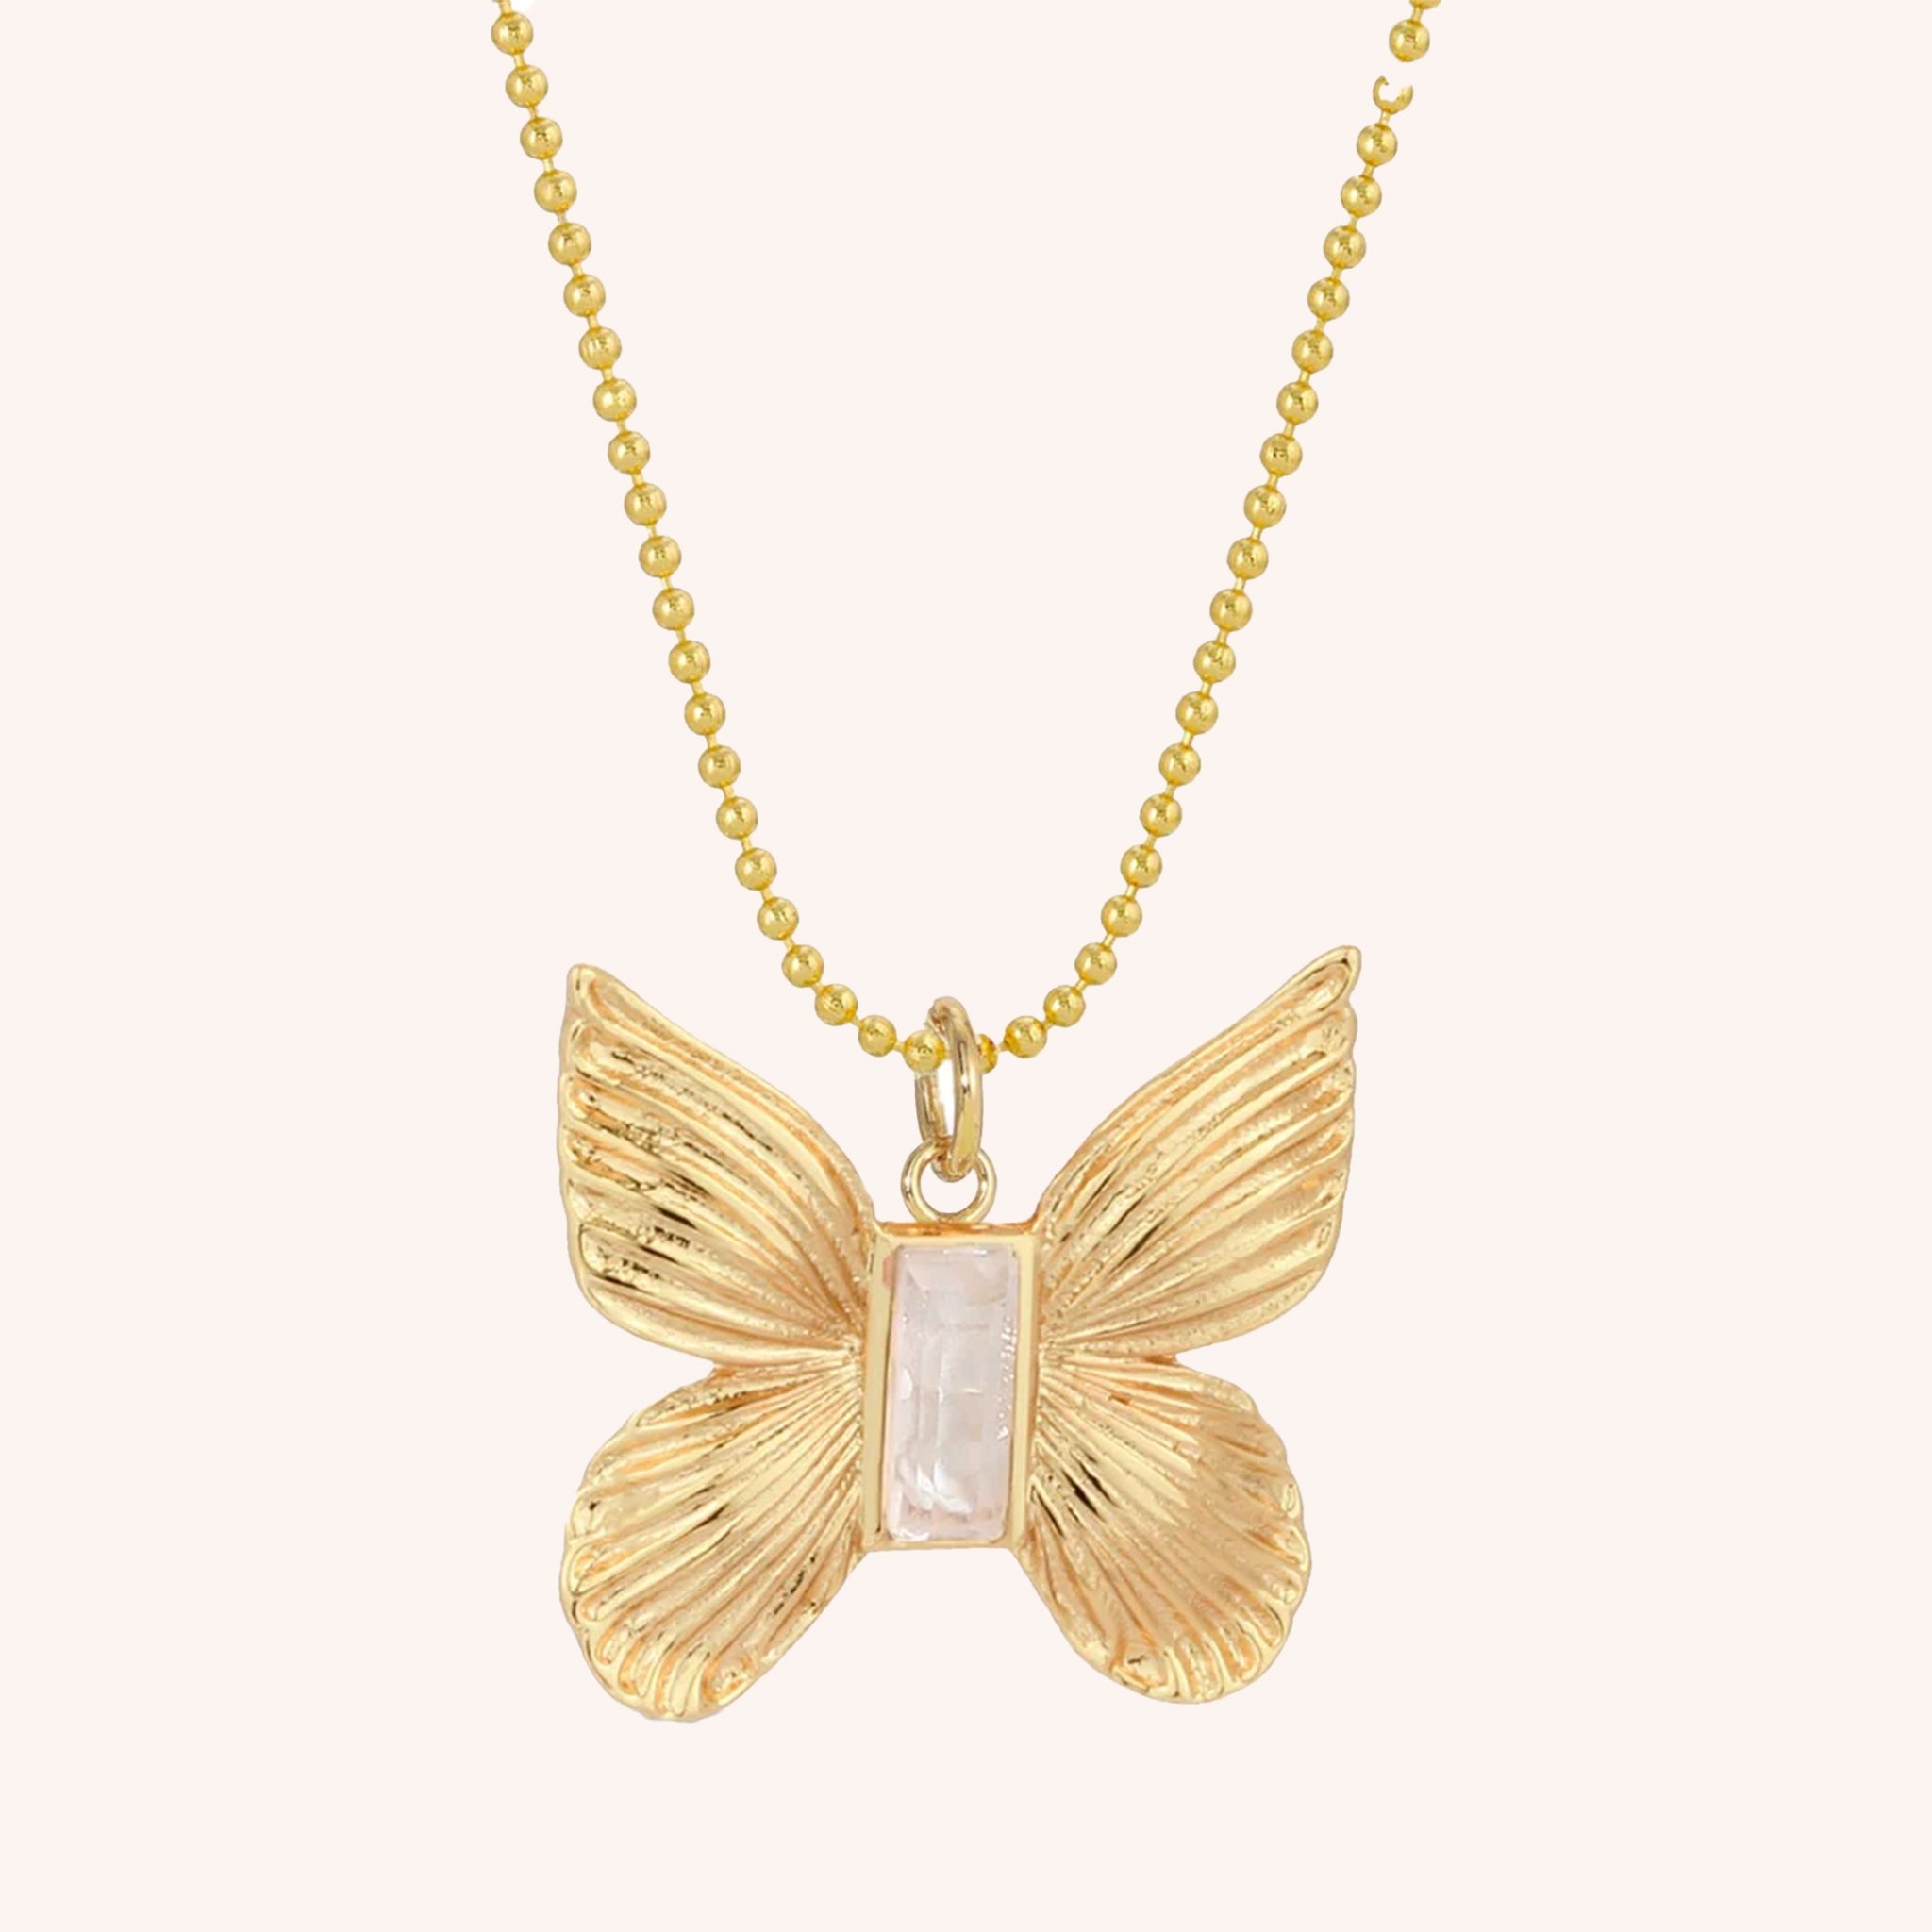 A gold ball chain necklace with a gold butterfly pendant with a baguette mother of pearl stone in the center.